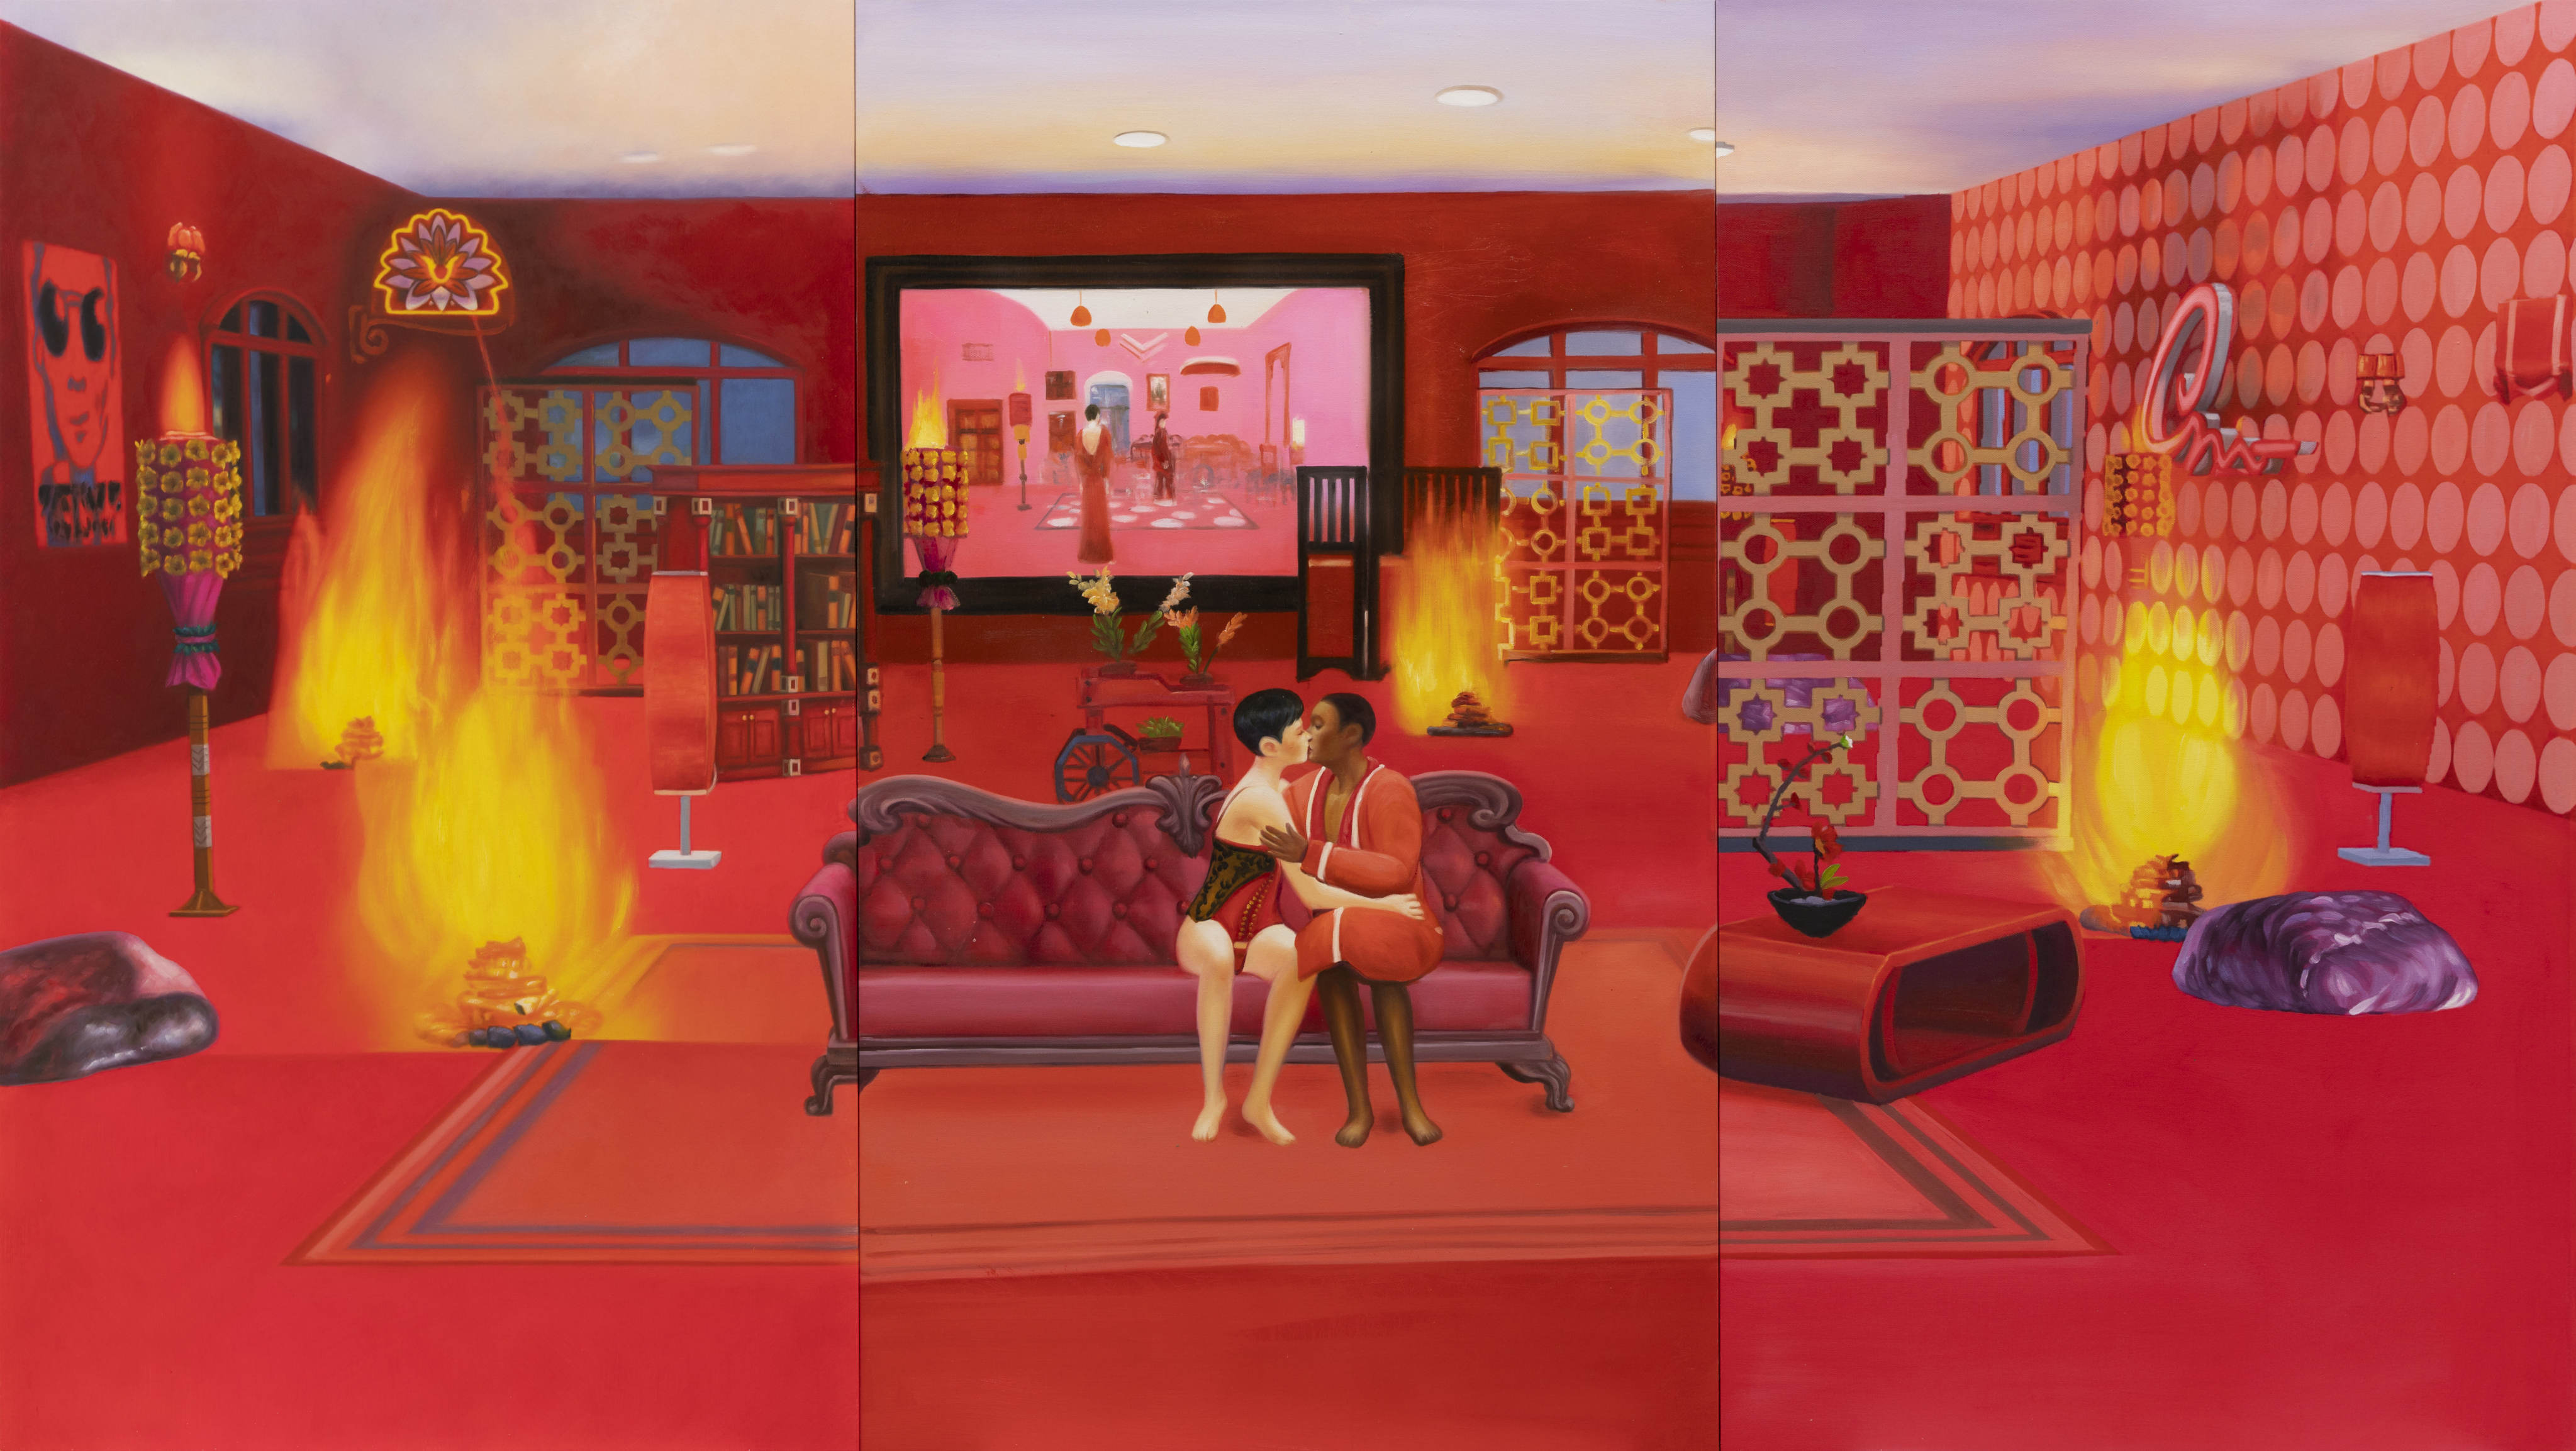 Feng Shui Painting, Fire 4 (2021) by Mak Ying-tung 2. The triptych, part of the artist’s “Home Sweet Home” series, was created using computer game The Sims and contains auspicious configurations of astrological concepts. Photo: Courtesy of the artist and de Sarthe